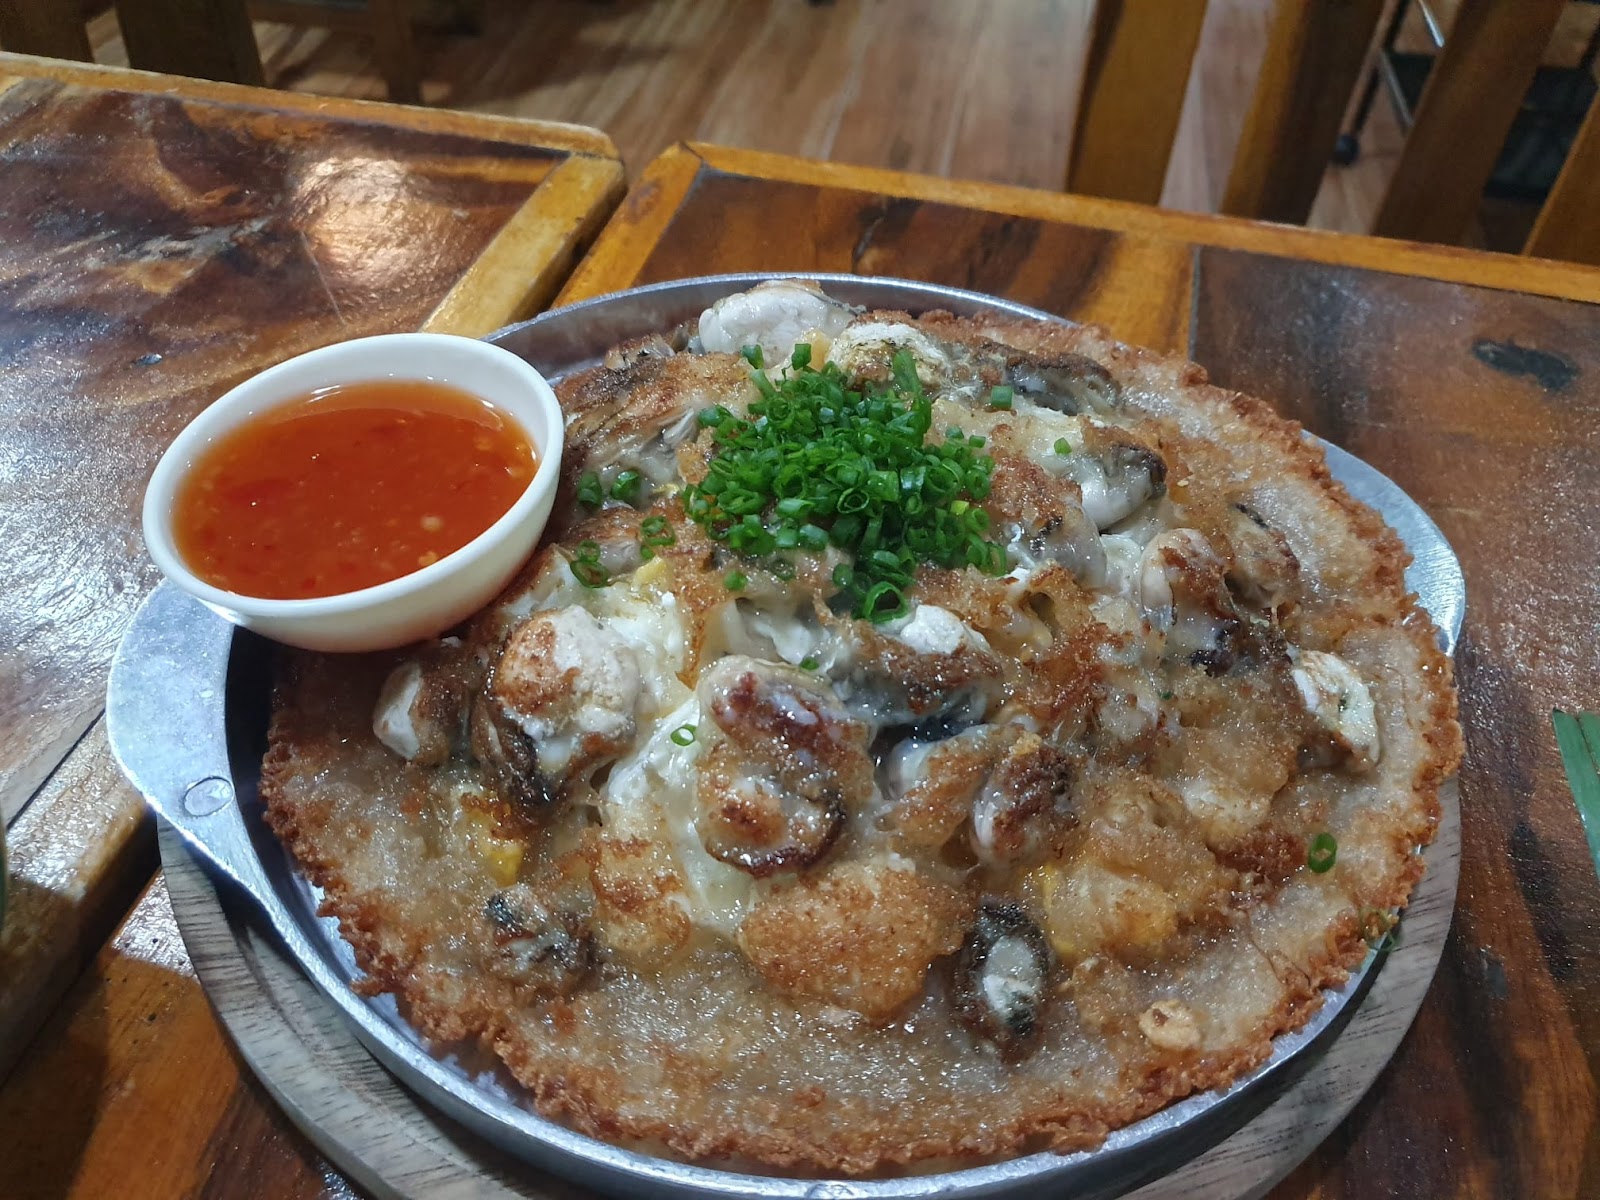 oyster omelette with sweet thai chili sauce from Northeast restaurant in Bangkok